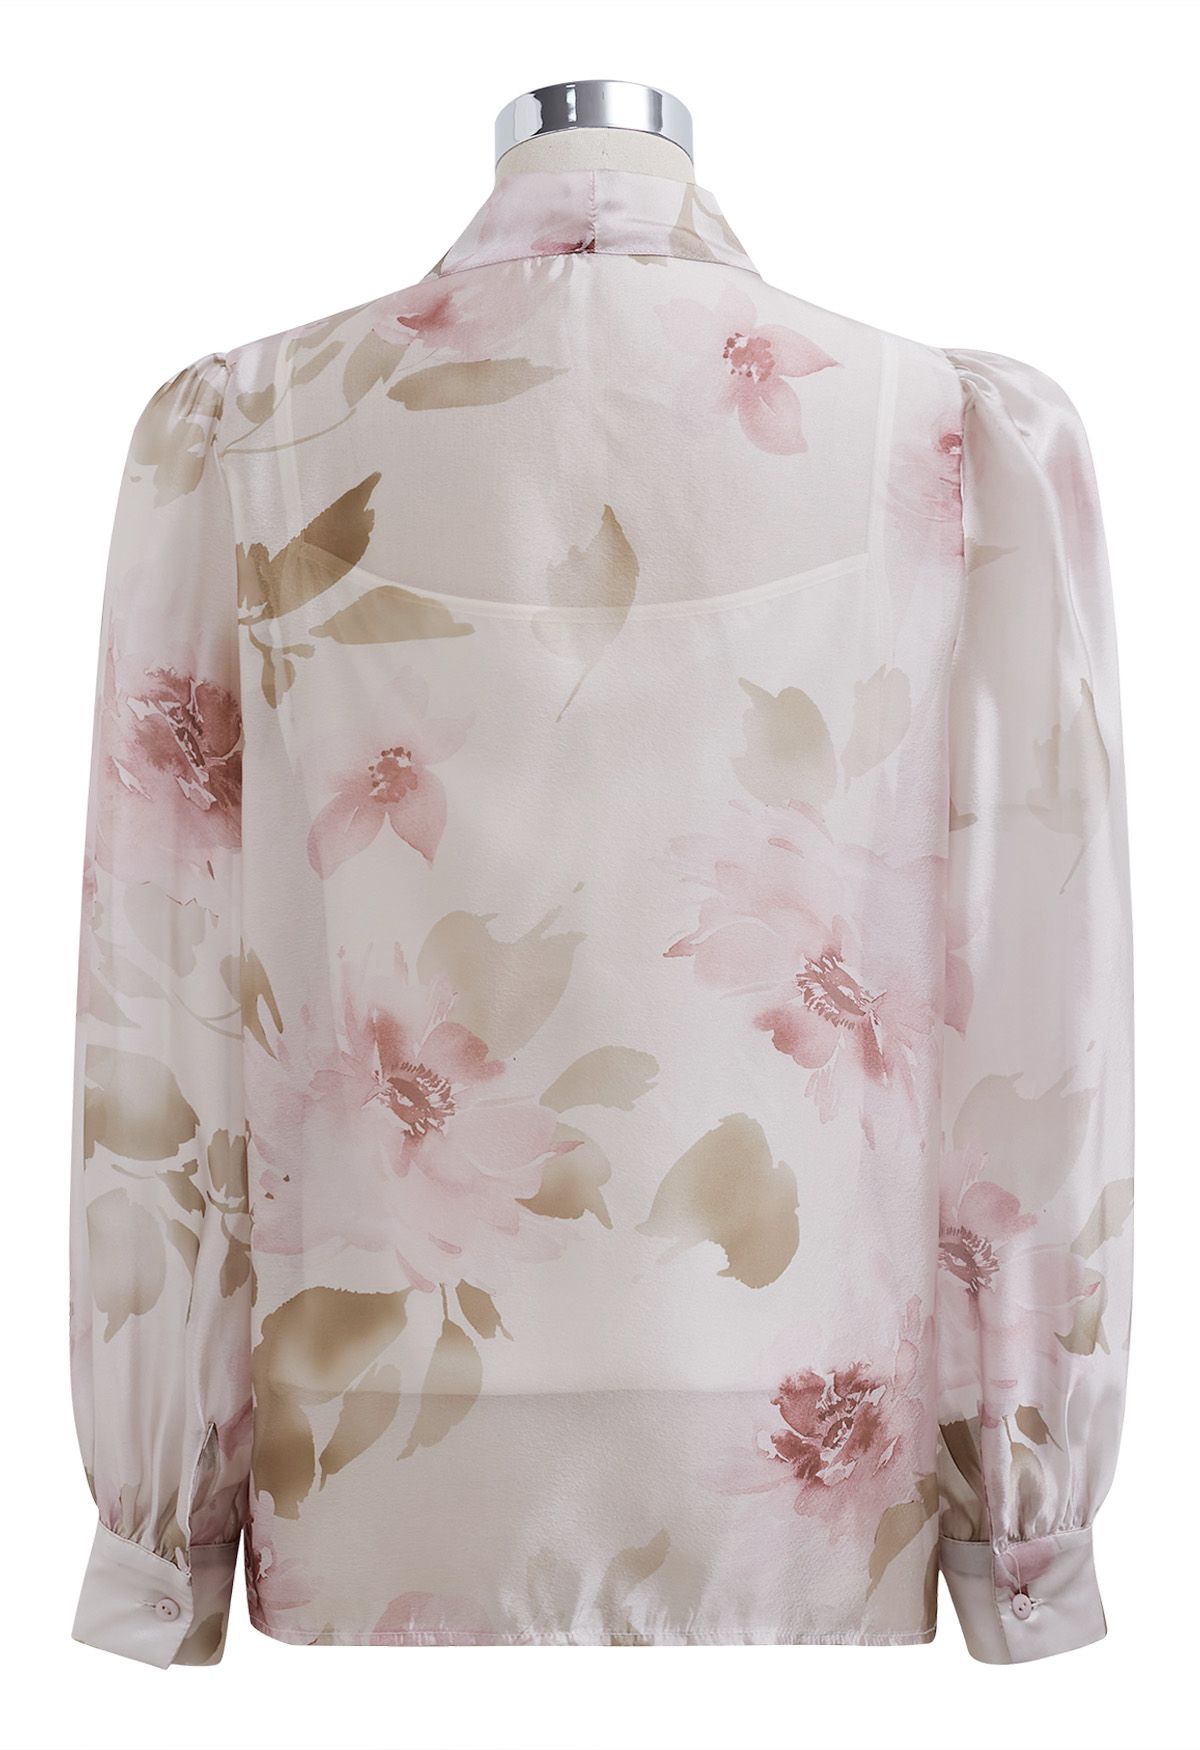 Enthralling Watercolor Floral Bowknot Sheer Shirt in Pink